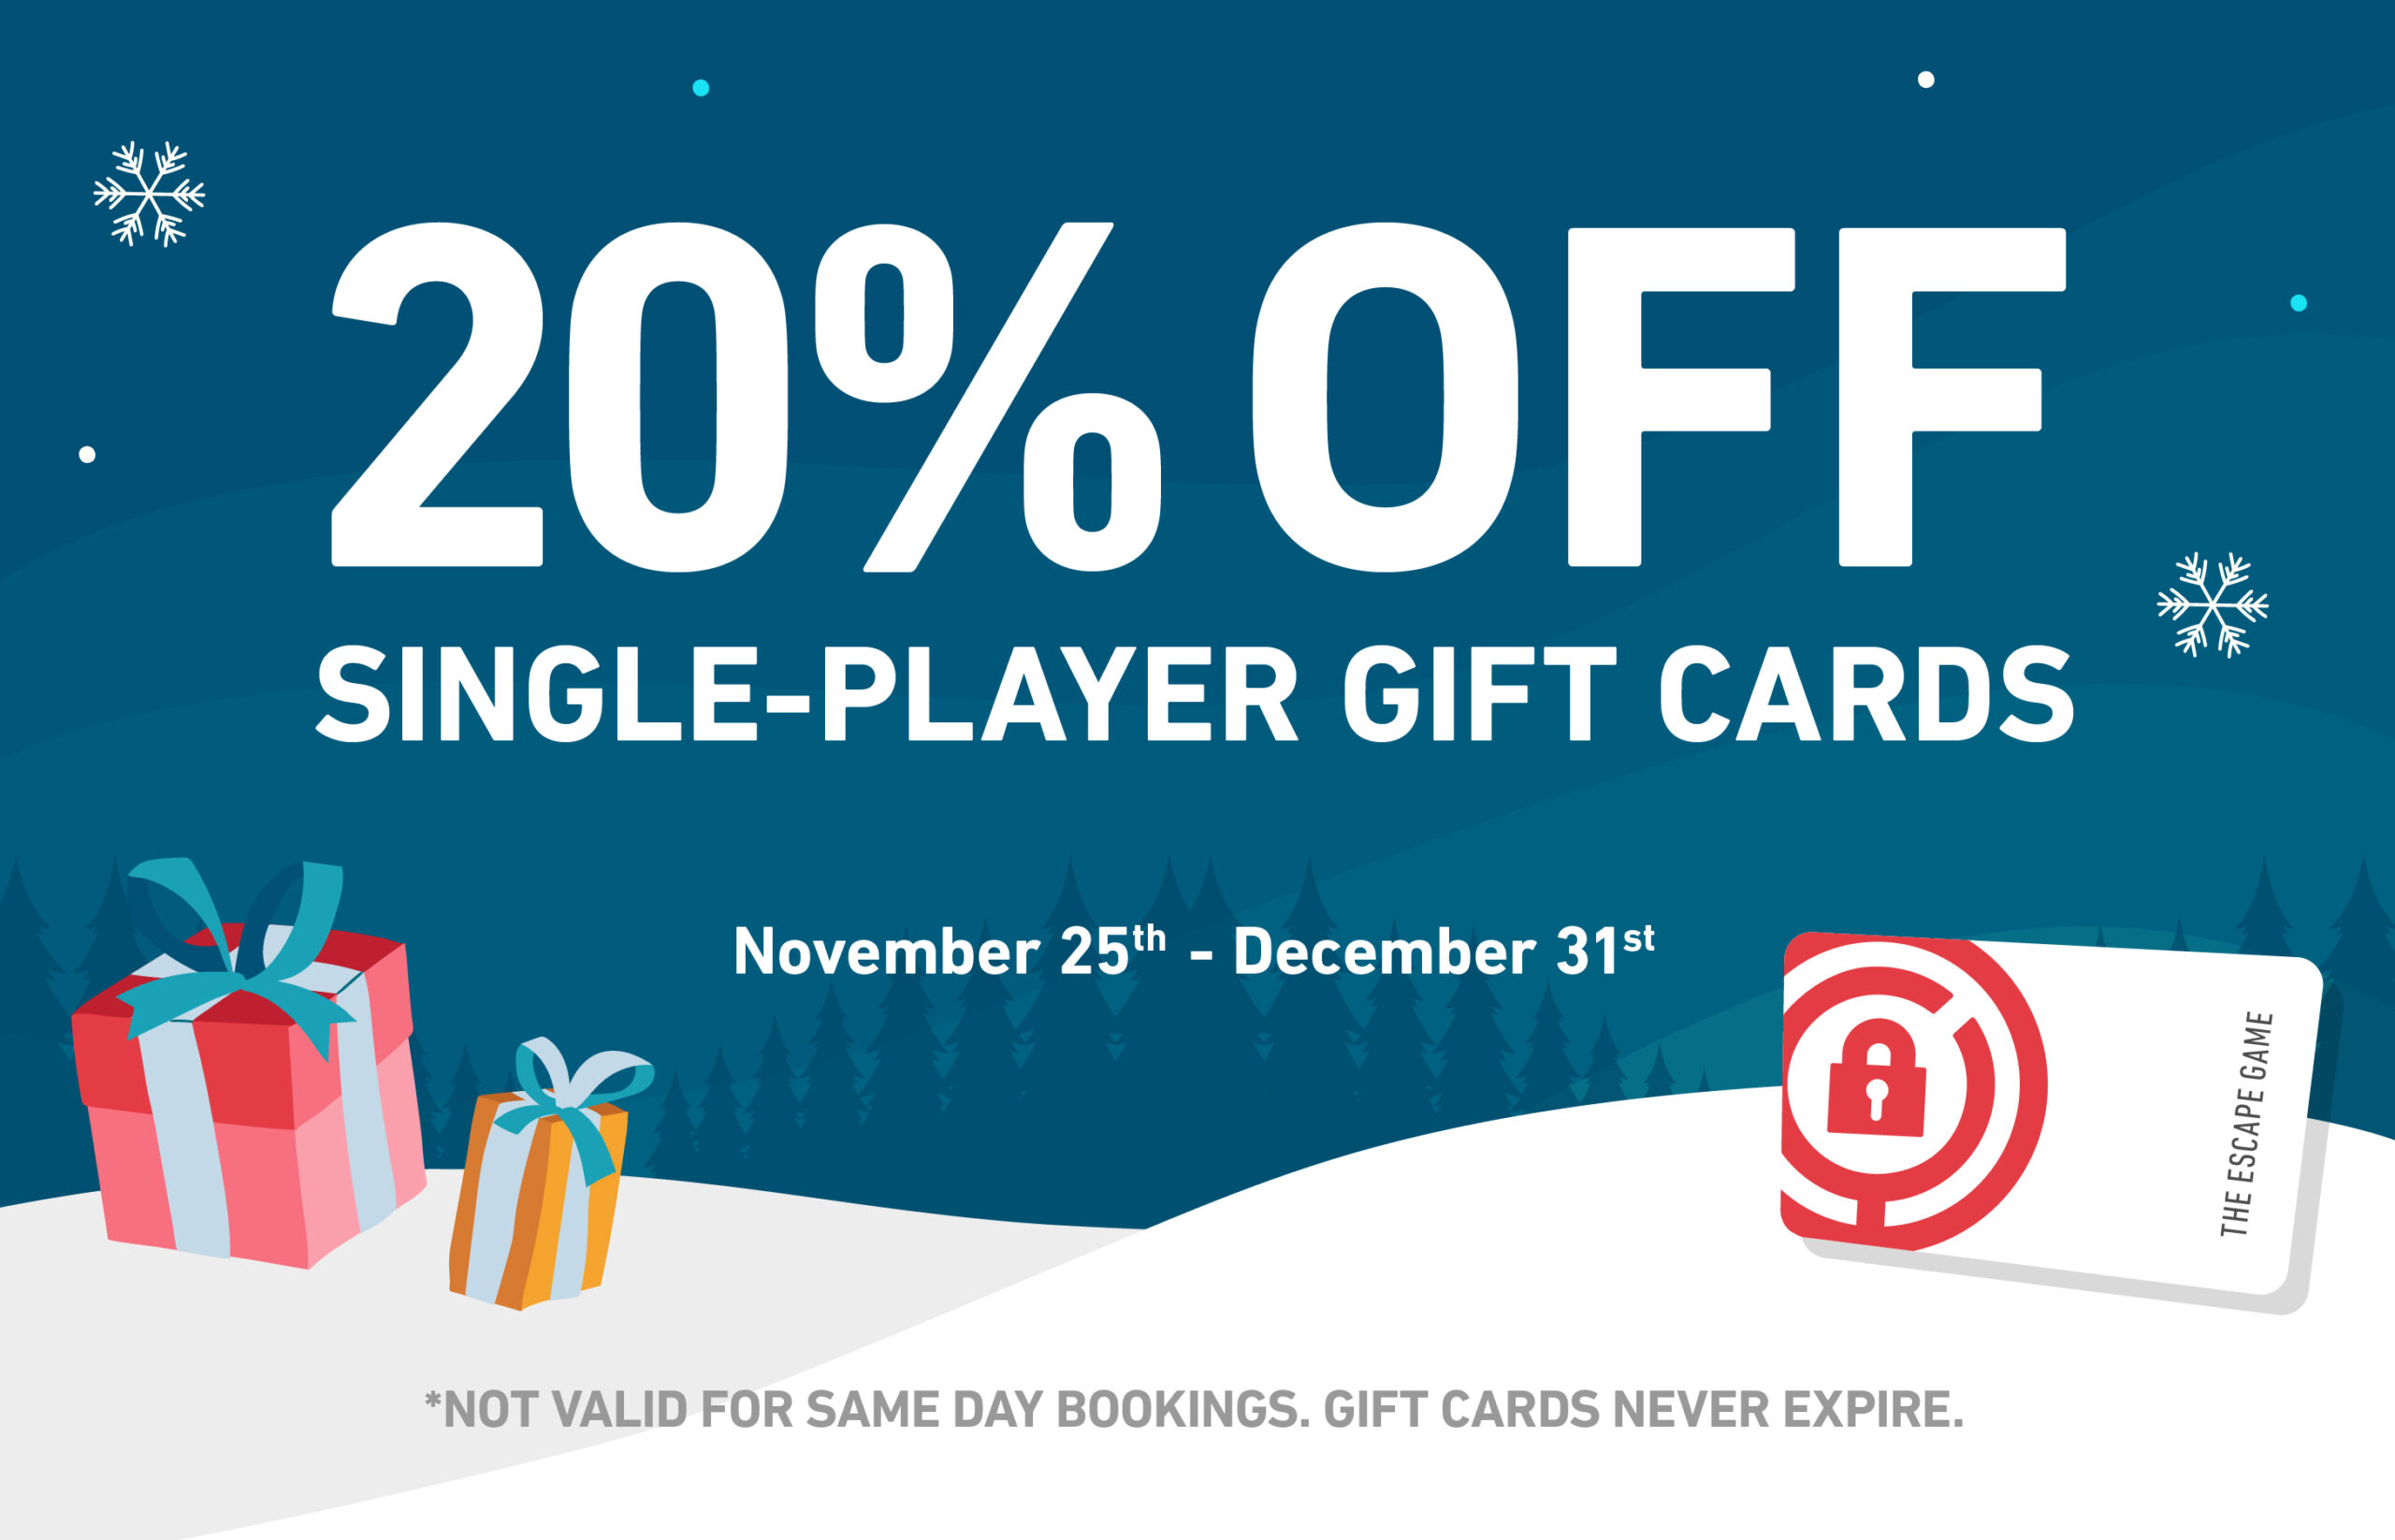 20% off single-player gift cards. November 25 - December 31, 2022 at The Escape Game.